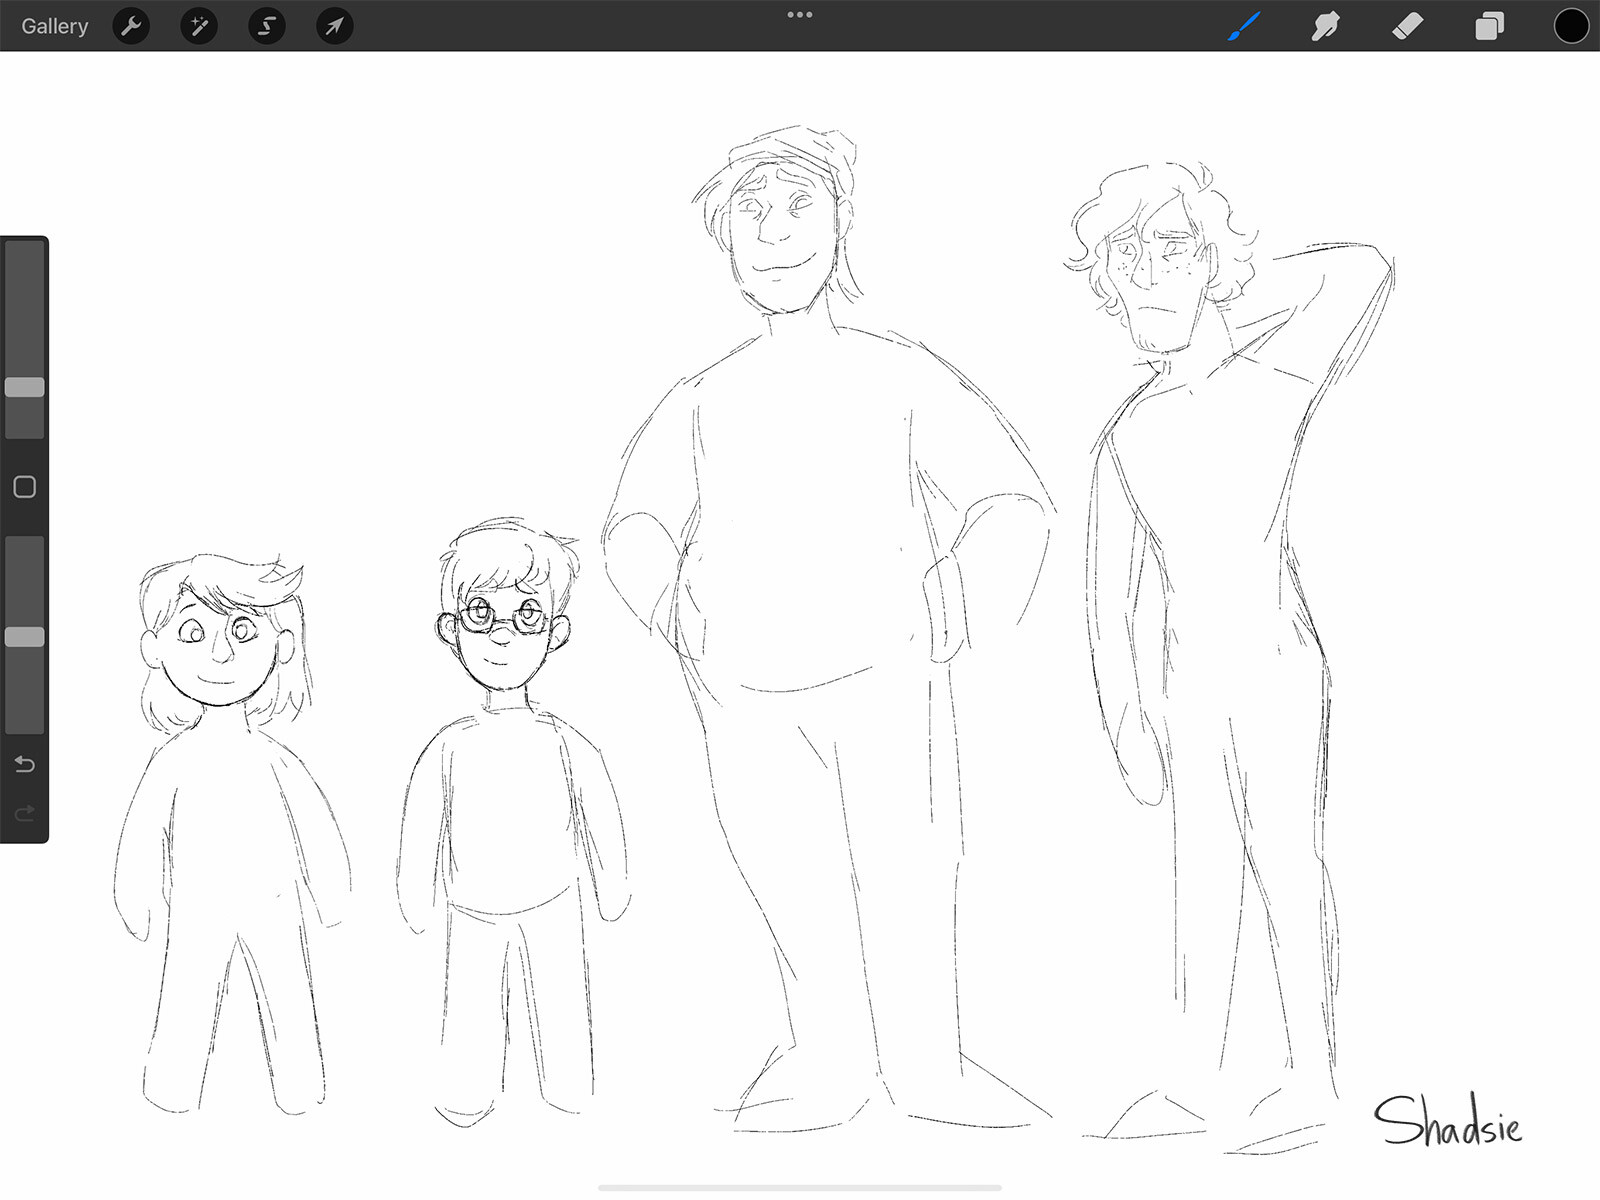 Sketch of character lineup